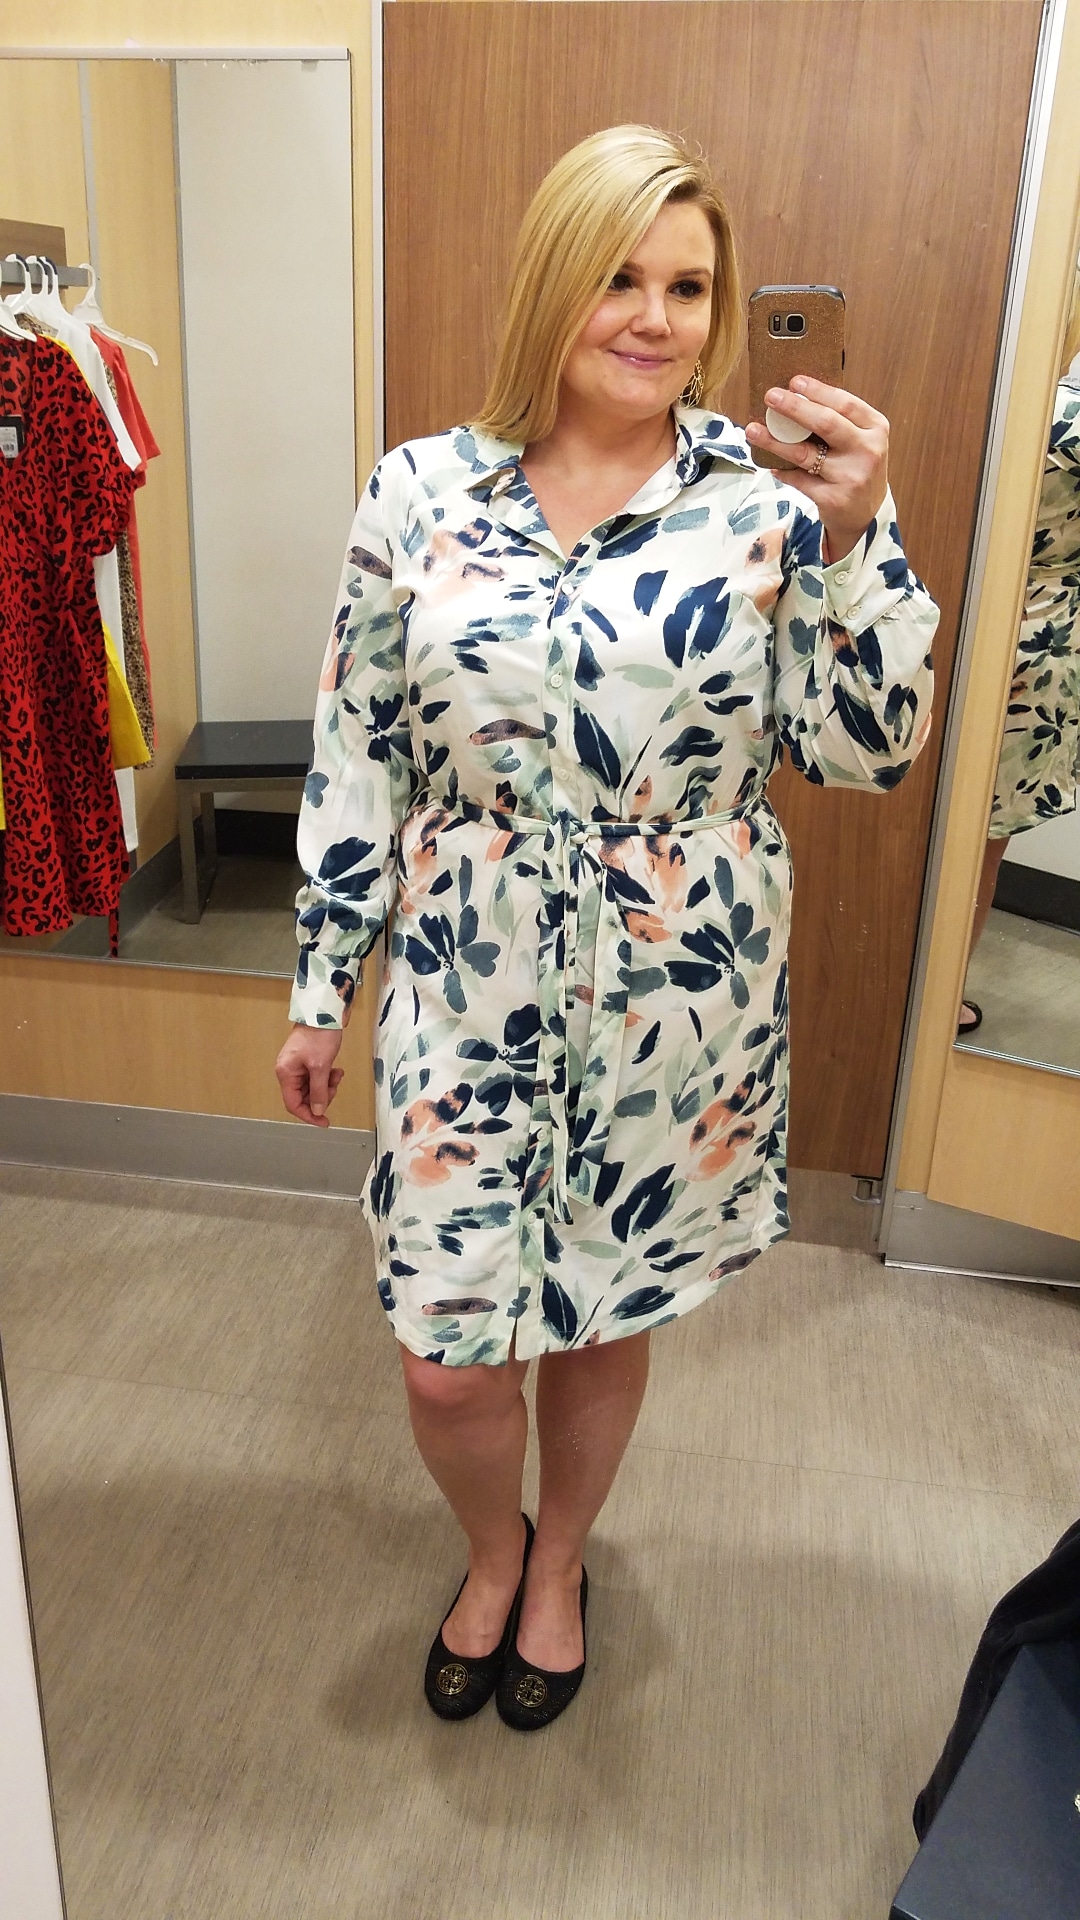 Orlando blogger Emily of Fabulously Overdressed shares this shirtdress from Target.